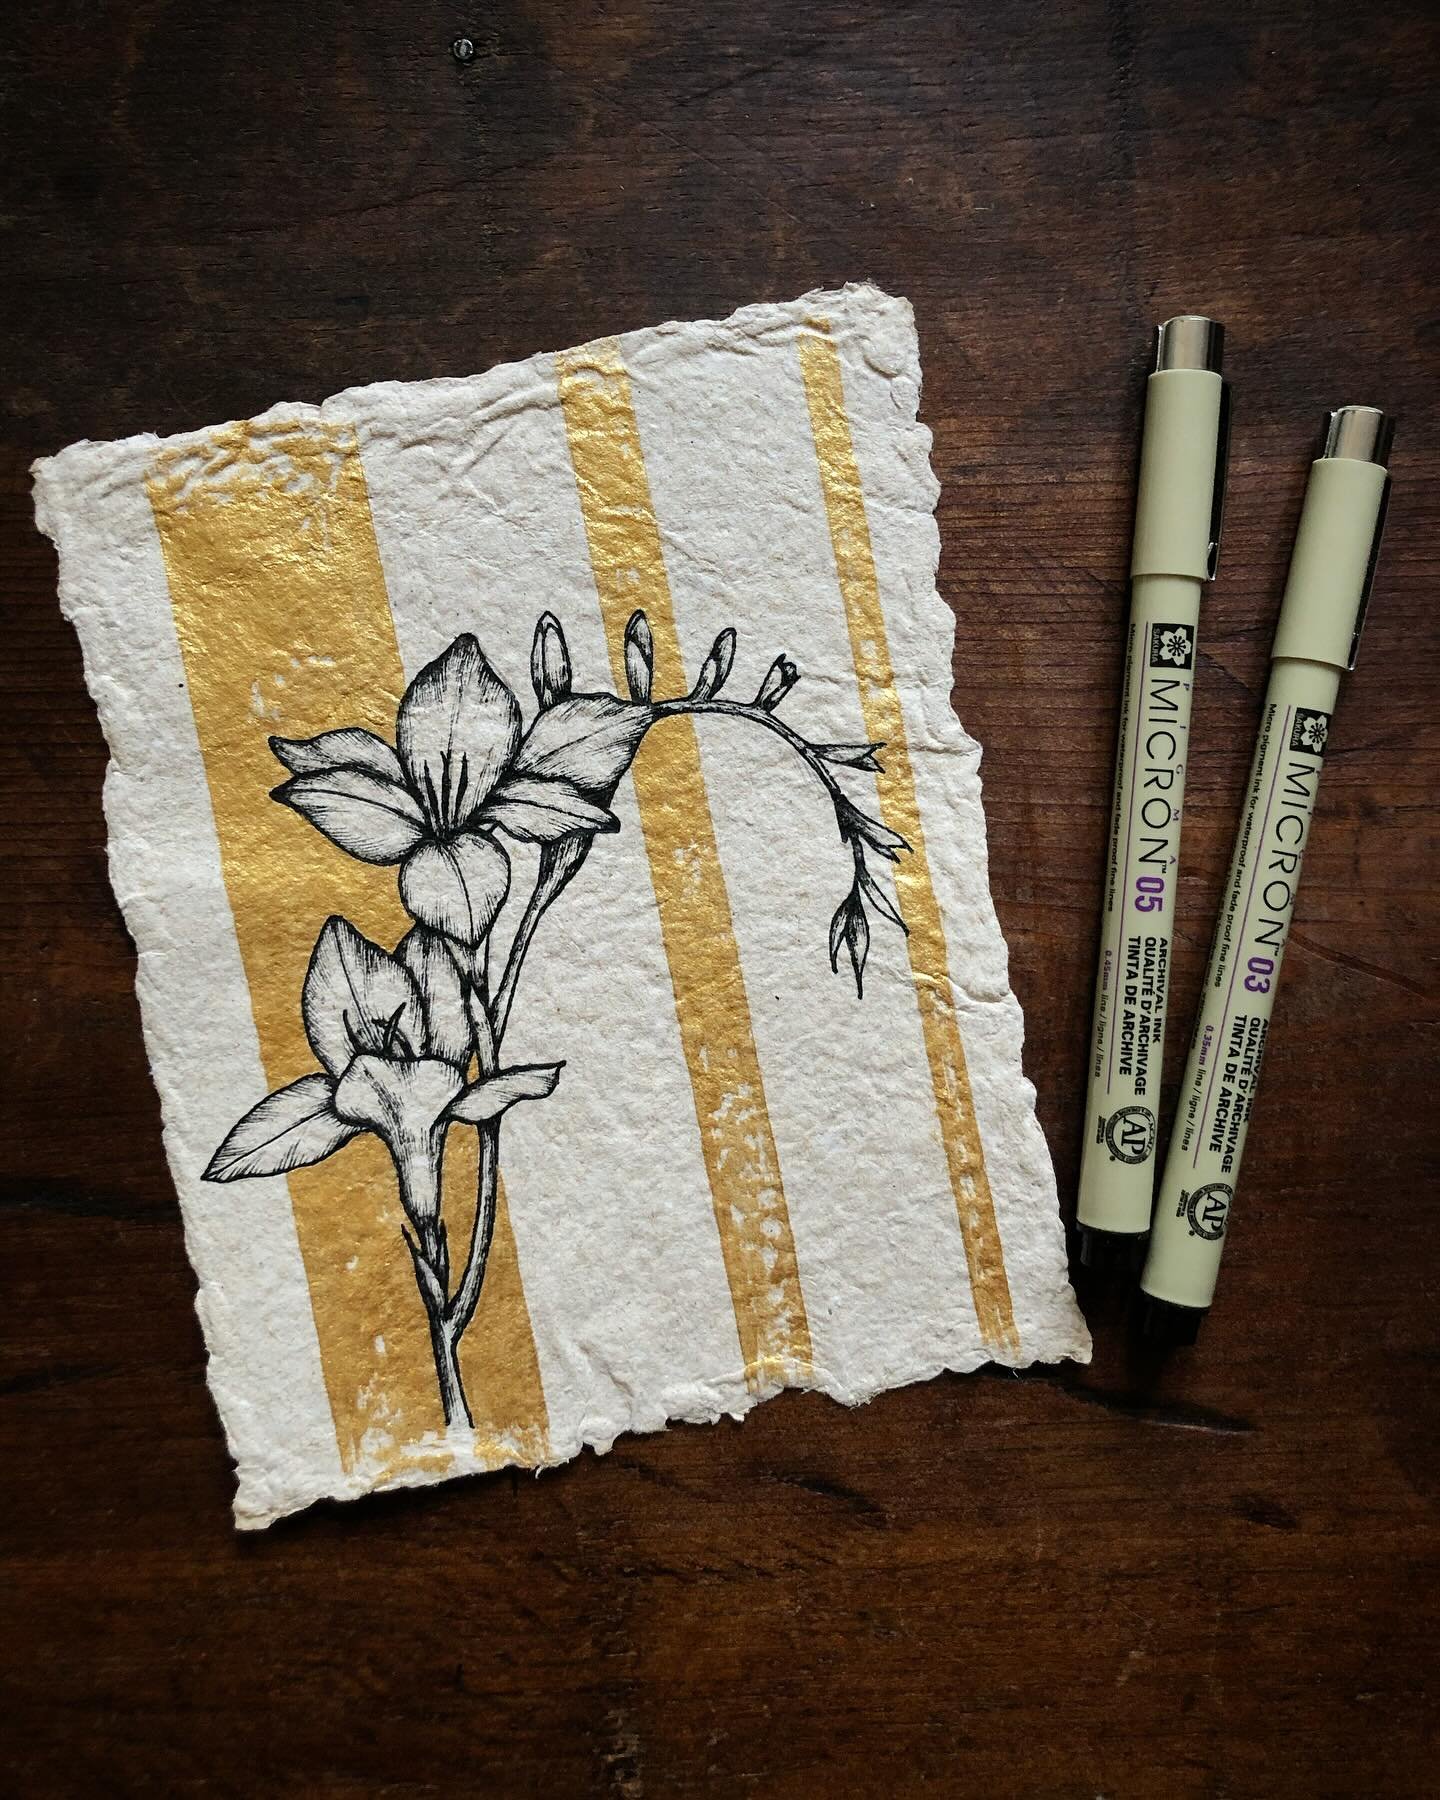 .: Freesias :. ✍🏼✨

Like a bundle of beauty here&rsquo;s a bunch of freesias blooming in my handmade paper and adorned with golden details.

The spring is already just a few days away from fading, but in my IG garden flowers bloom all year round. 

